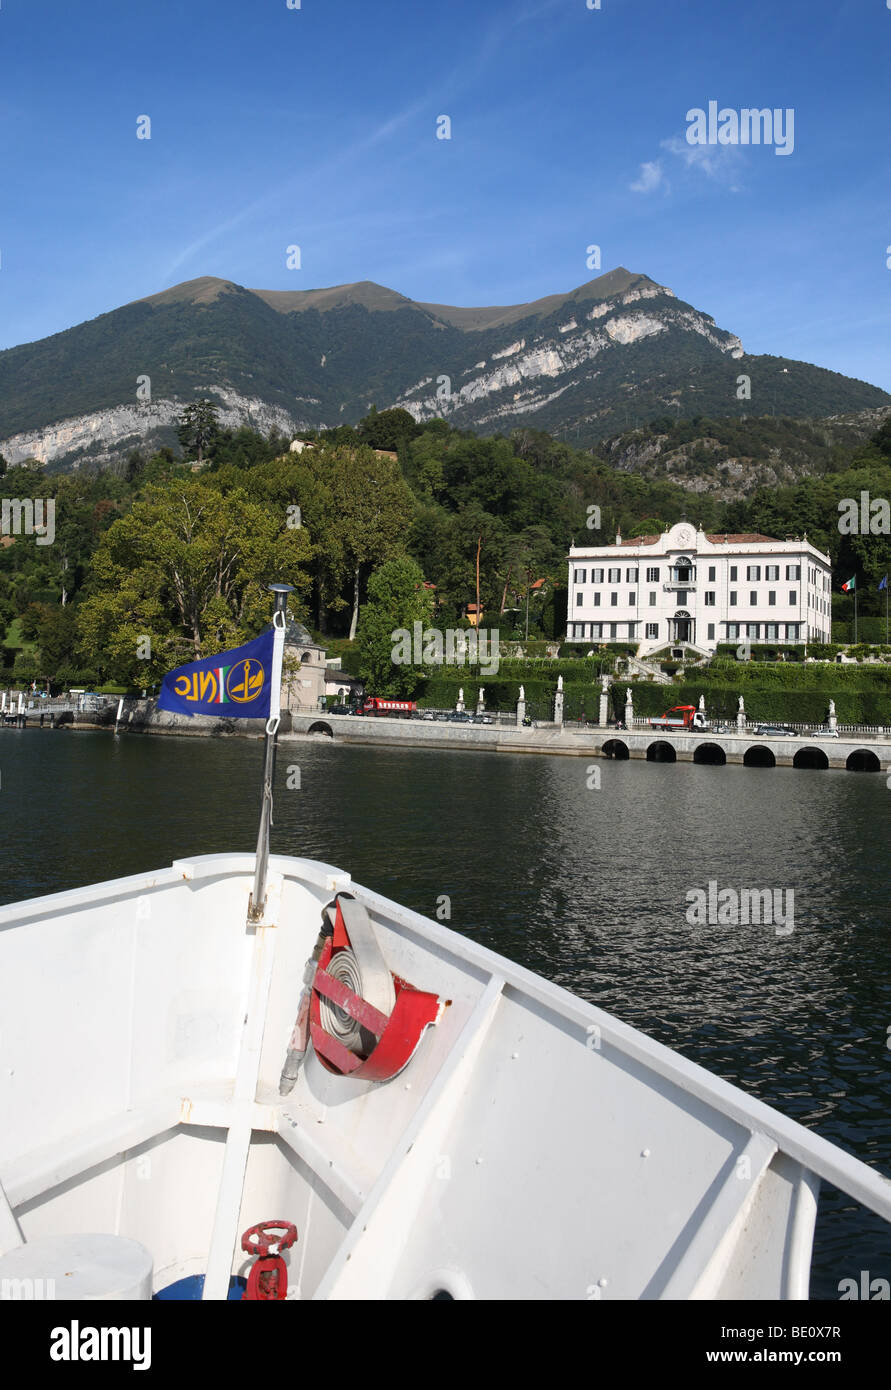 Villa Carlotta in Tremezzo seen from the bows of an approaching steamer on Lake Como, Italy, Europe Stock Photo